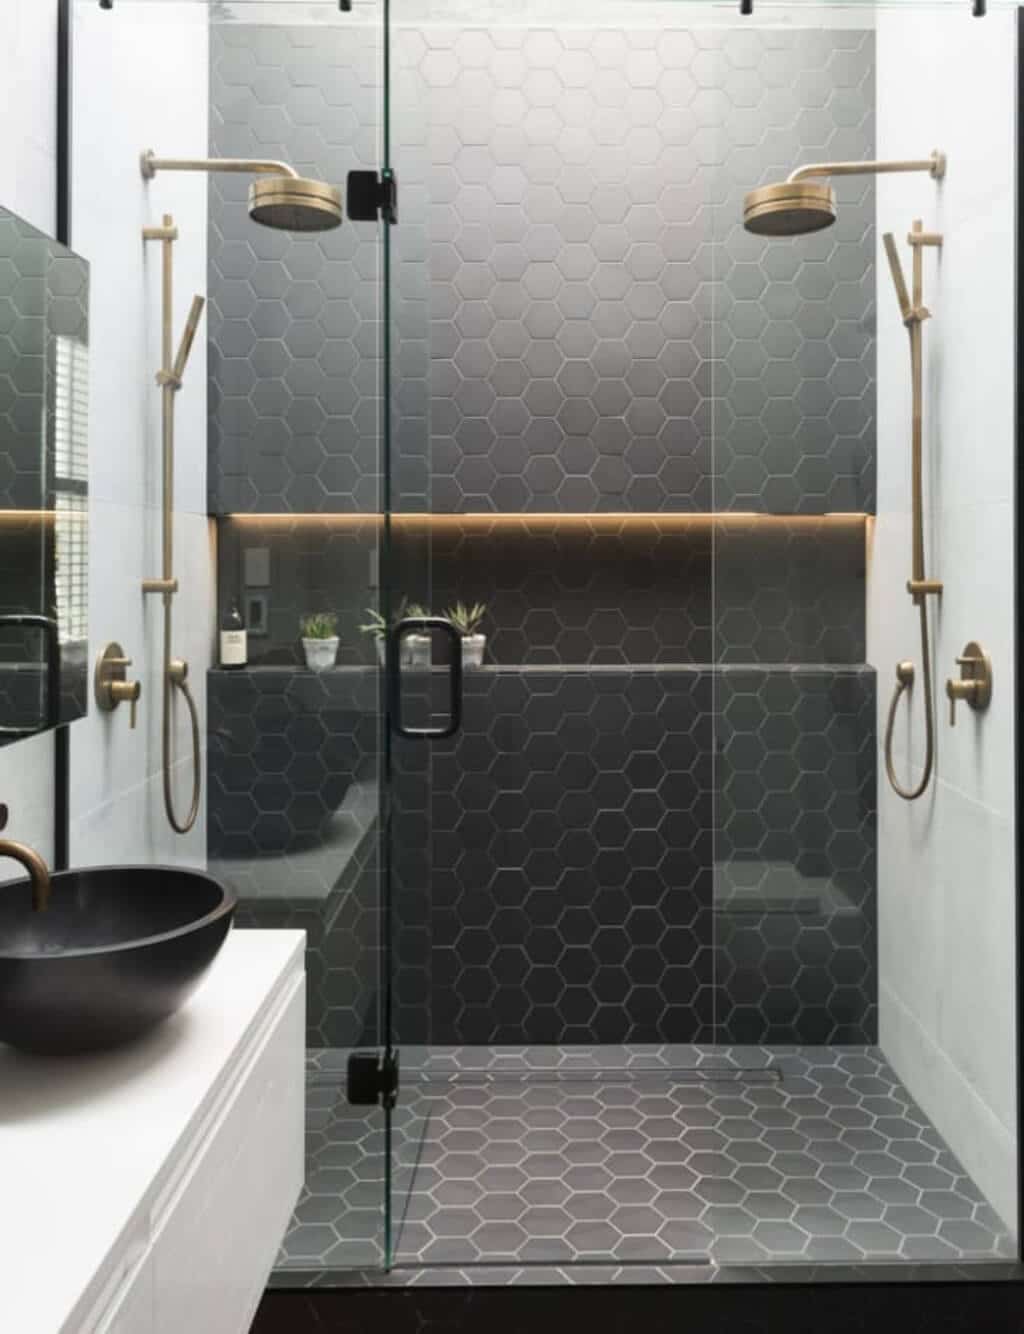 A black and white bathroom with a glass shower
